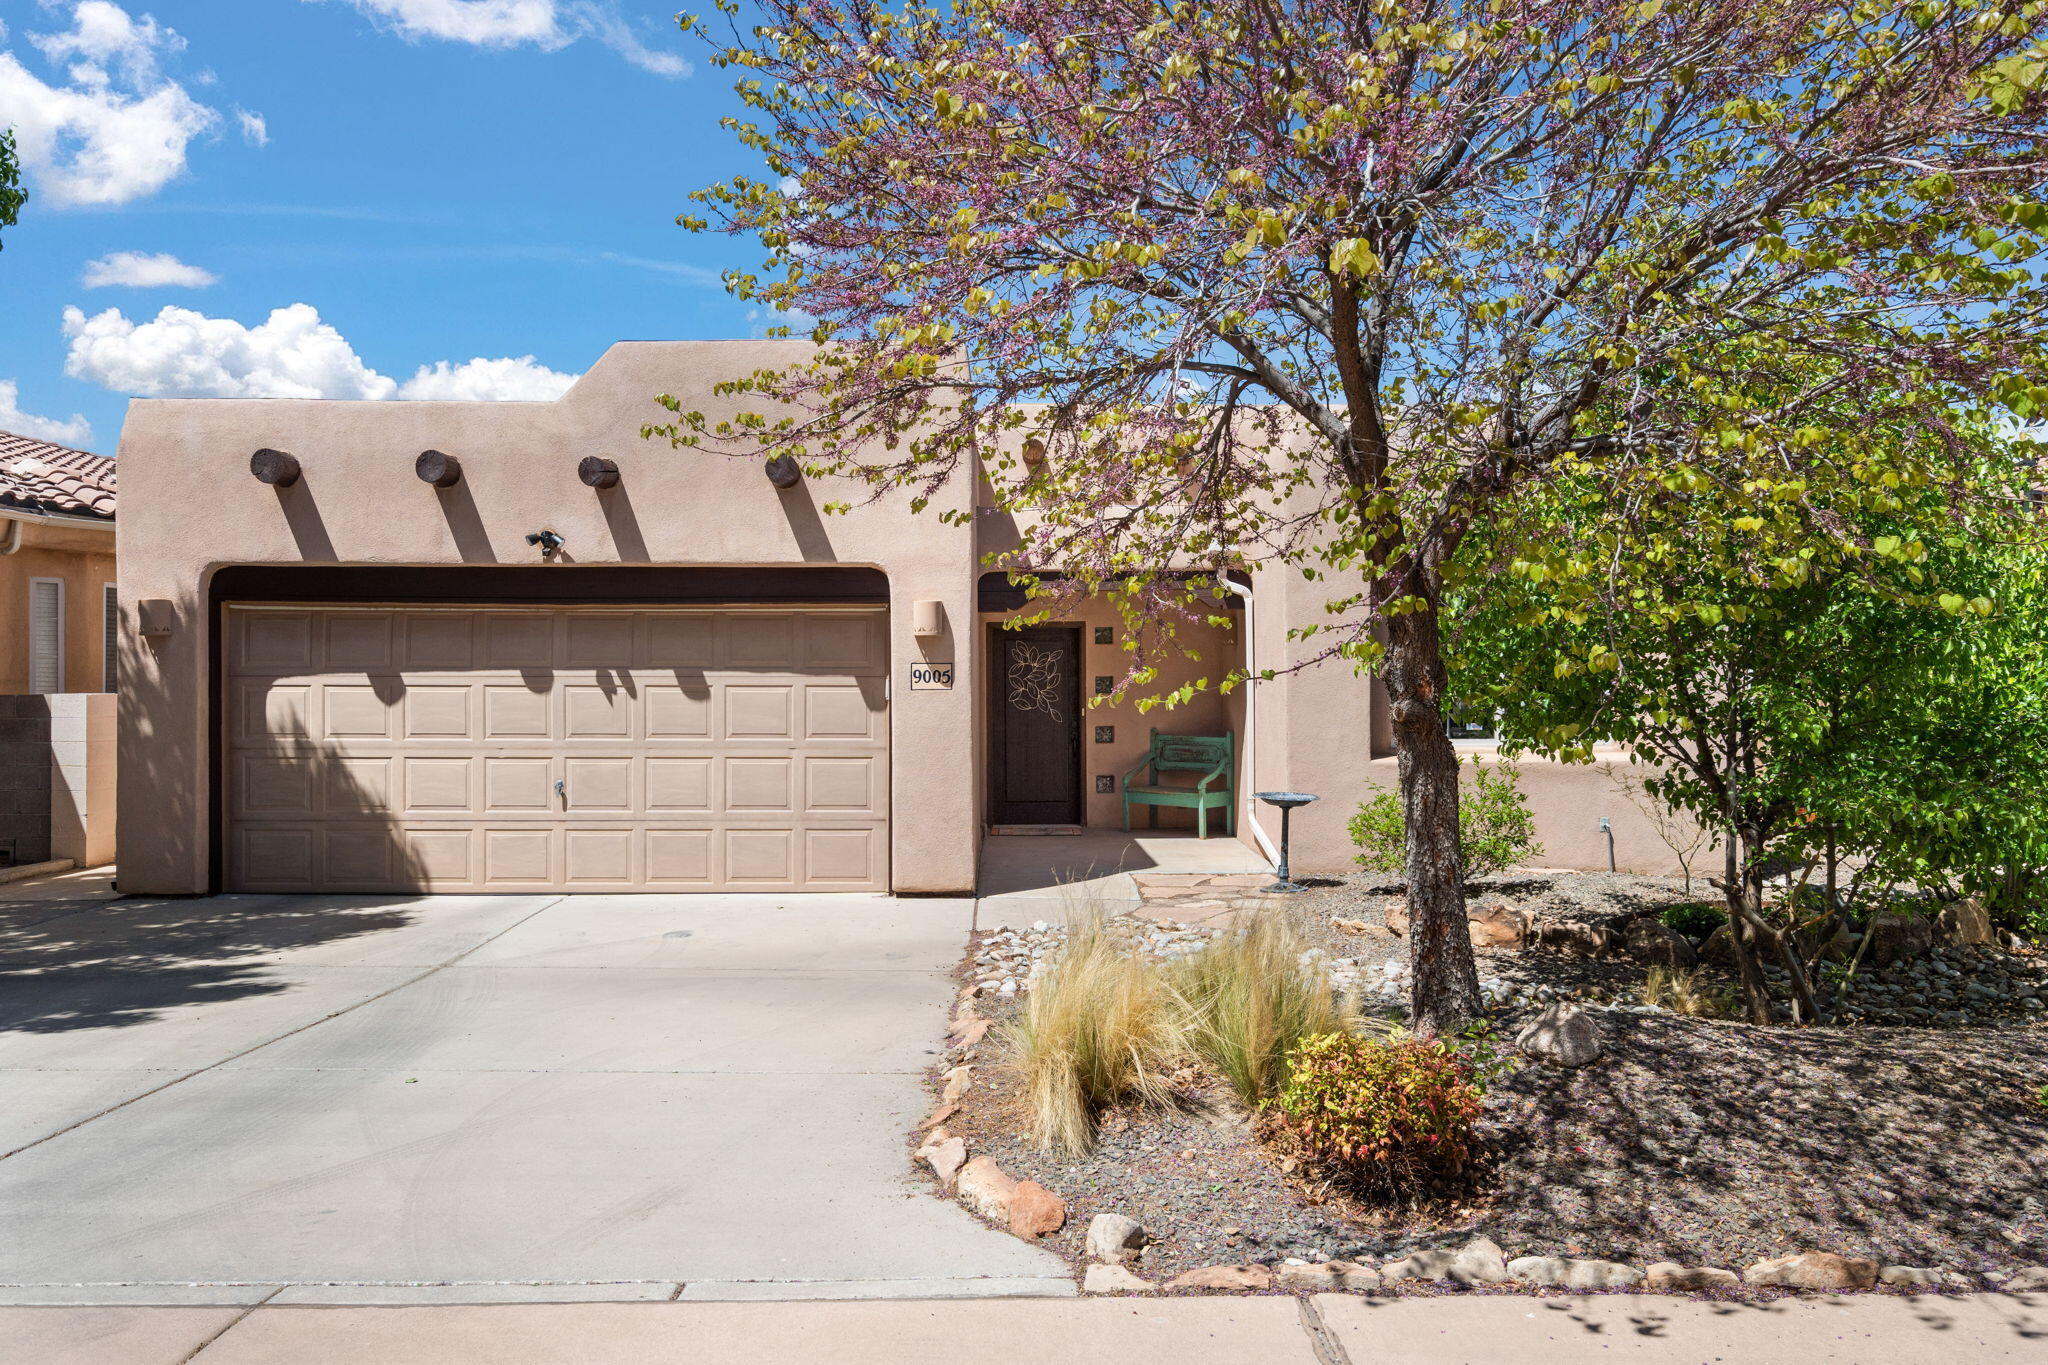 WOW! FANTASTIC OPPORTUNITY. This immaculate gem (Pueblo style) in the highly sought after Stone Brooke Estates with marvelous views of the Sandias is a true find! Over $35,000 in updates: New HVAC and Refrigerated air (2023), New Wood Laminate Floors (2023), New Hot Water Heater (2023) Roof with warranty and NO CARPET. Lots of natural light, private backyard, gas fireplace for those cool nights, huge walk in closet, quiet street, updated baths and even a doggie door!  Washer and dryer stay. Pride of ownership evident throughout! Located with easy access to Paseo, I-25, restaurants, grocery stores, A+ school districts & just blocks from Domingo Baca Park and Multicenter with new public pool underway.